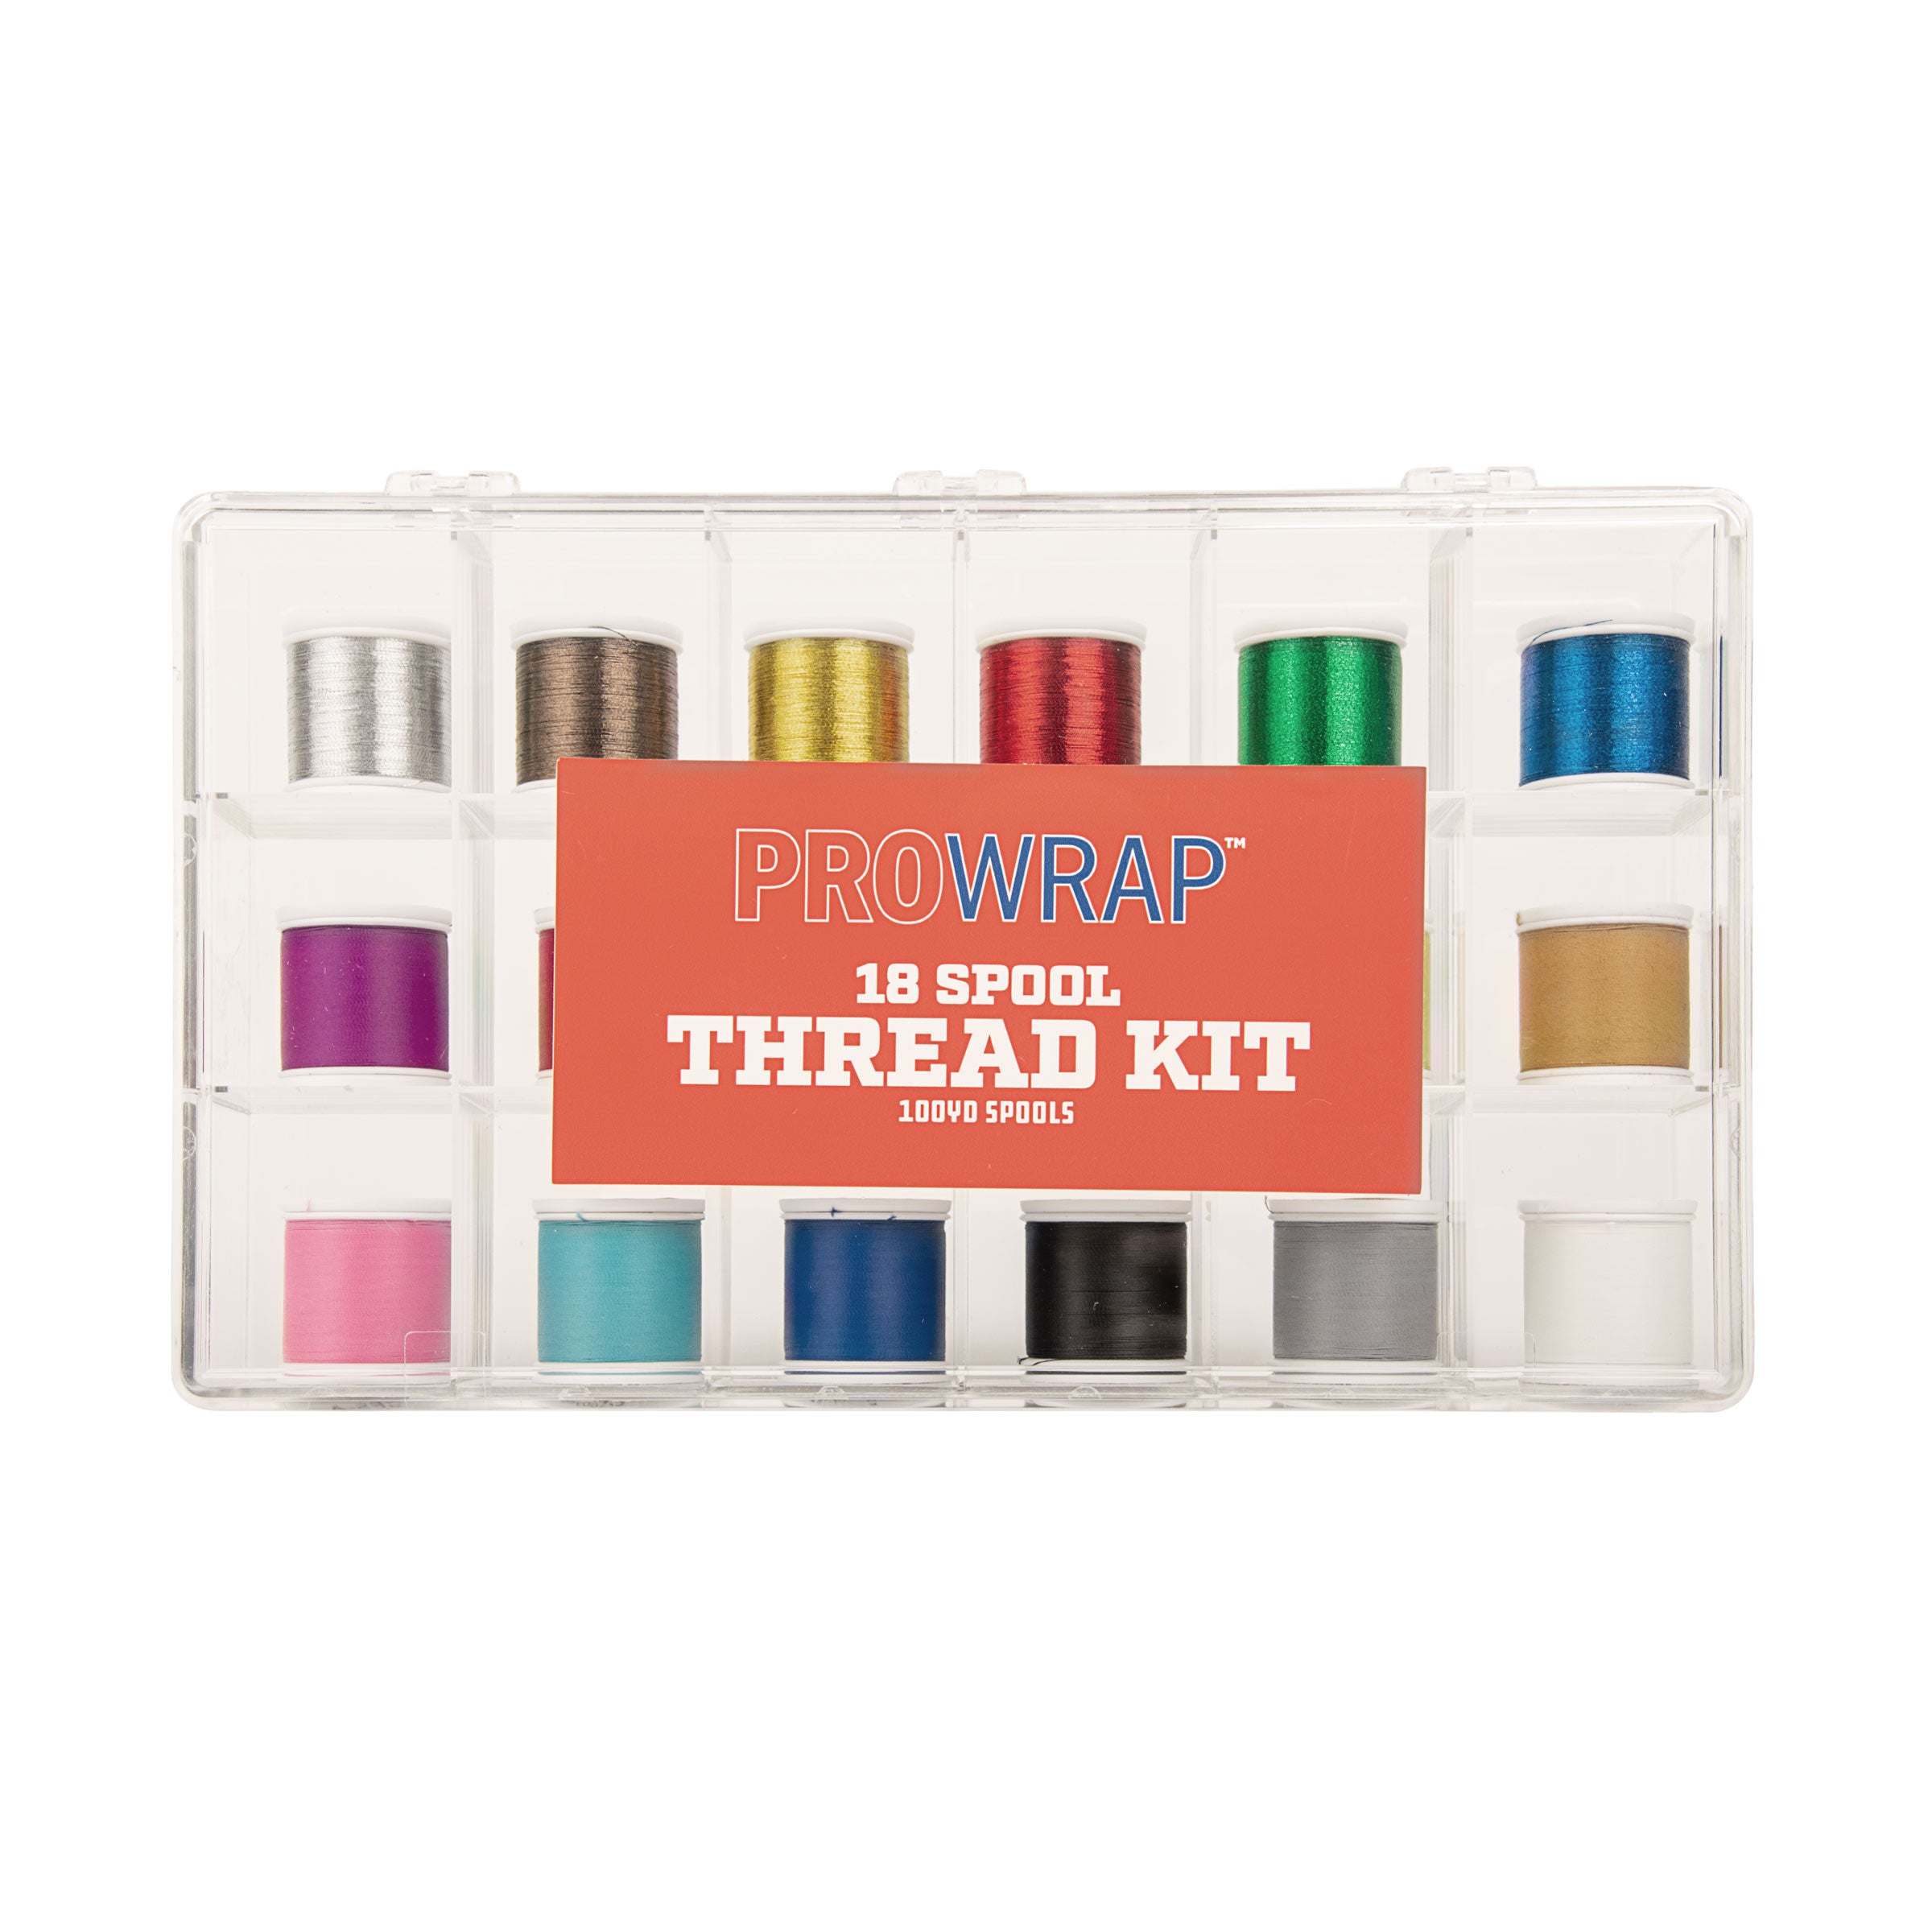 Thread Kits for Rod Building - Free Shipping